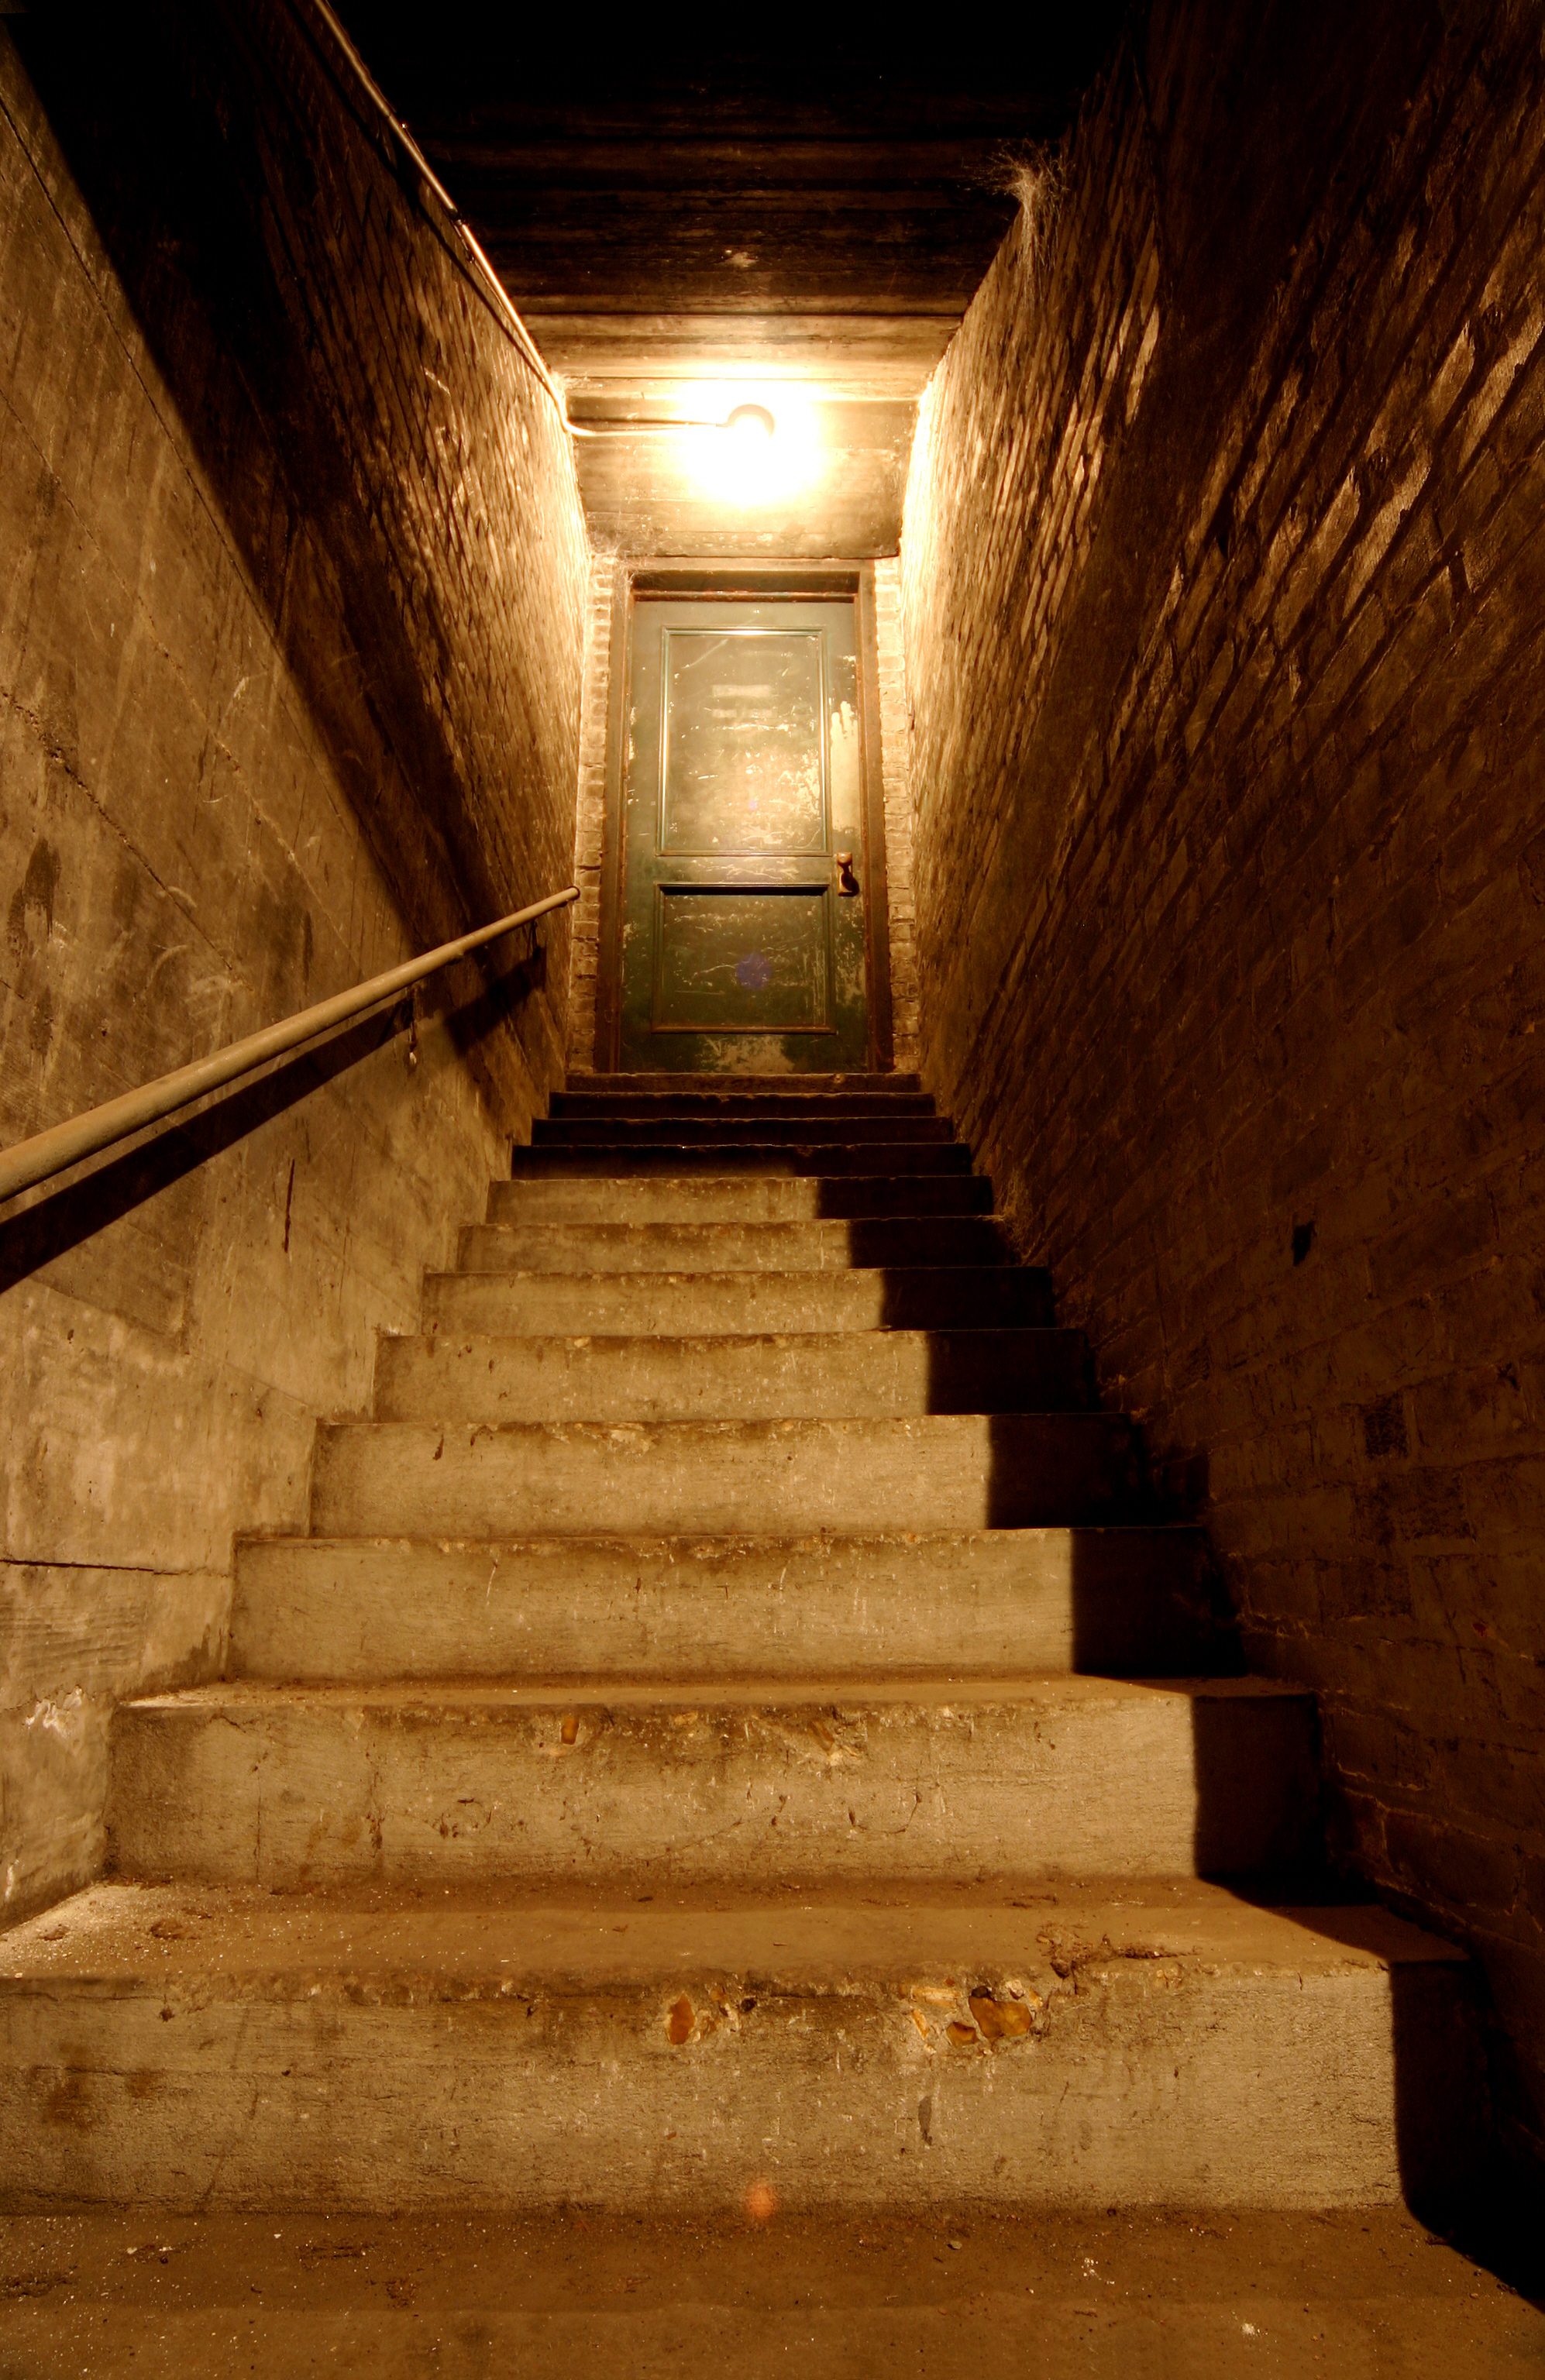 Dimly lit staircase in a basement